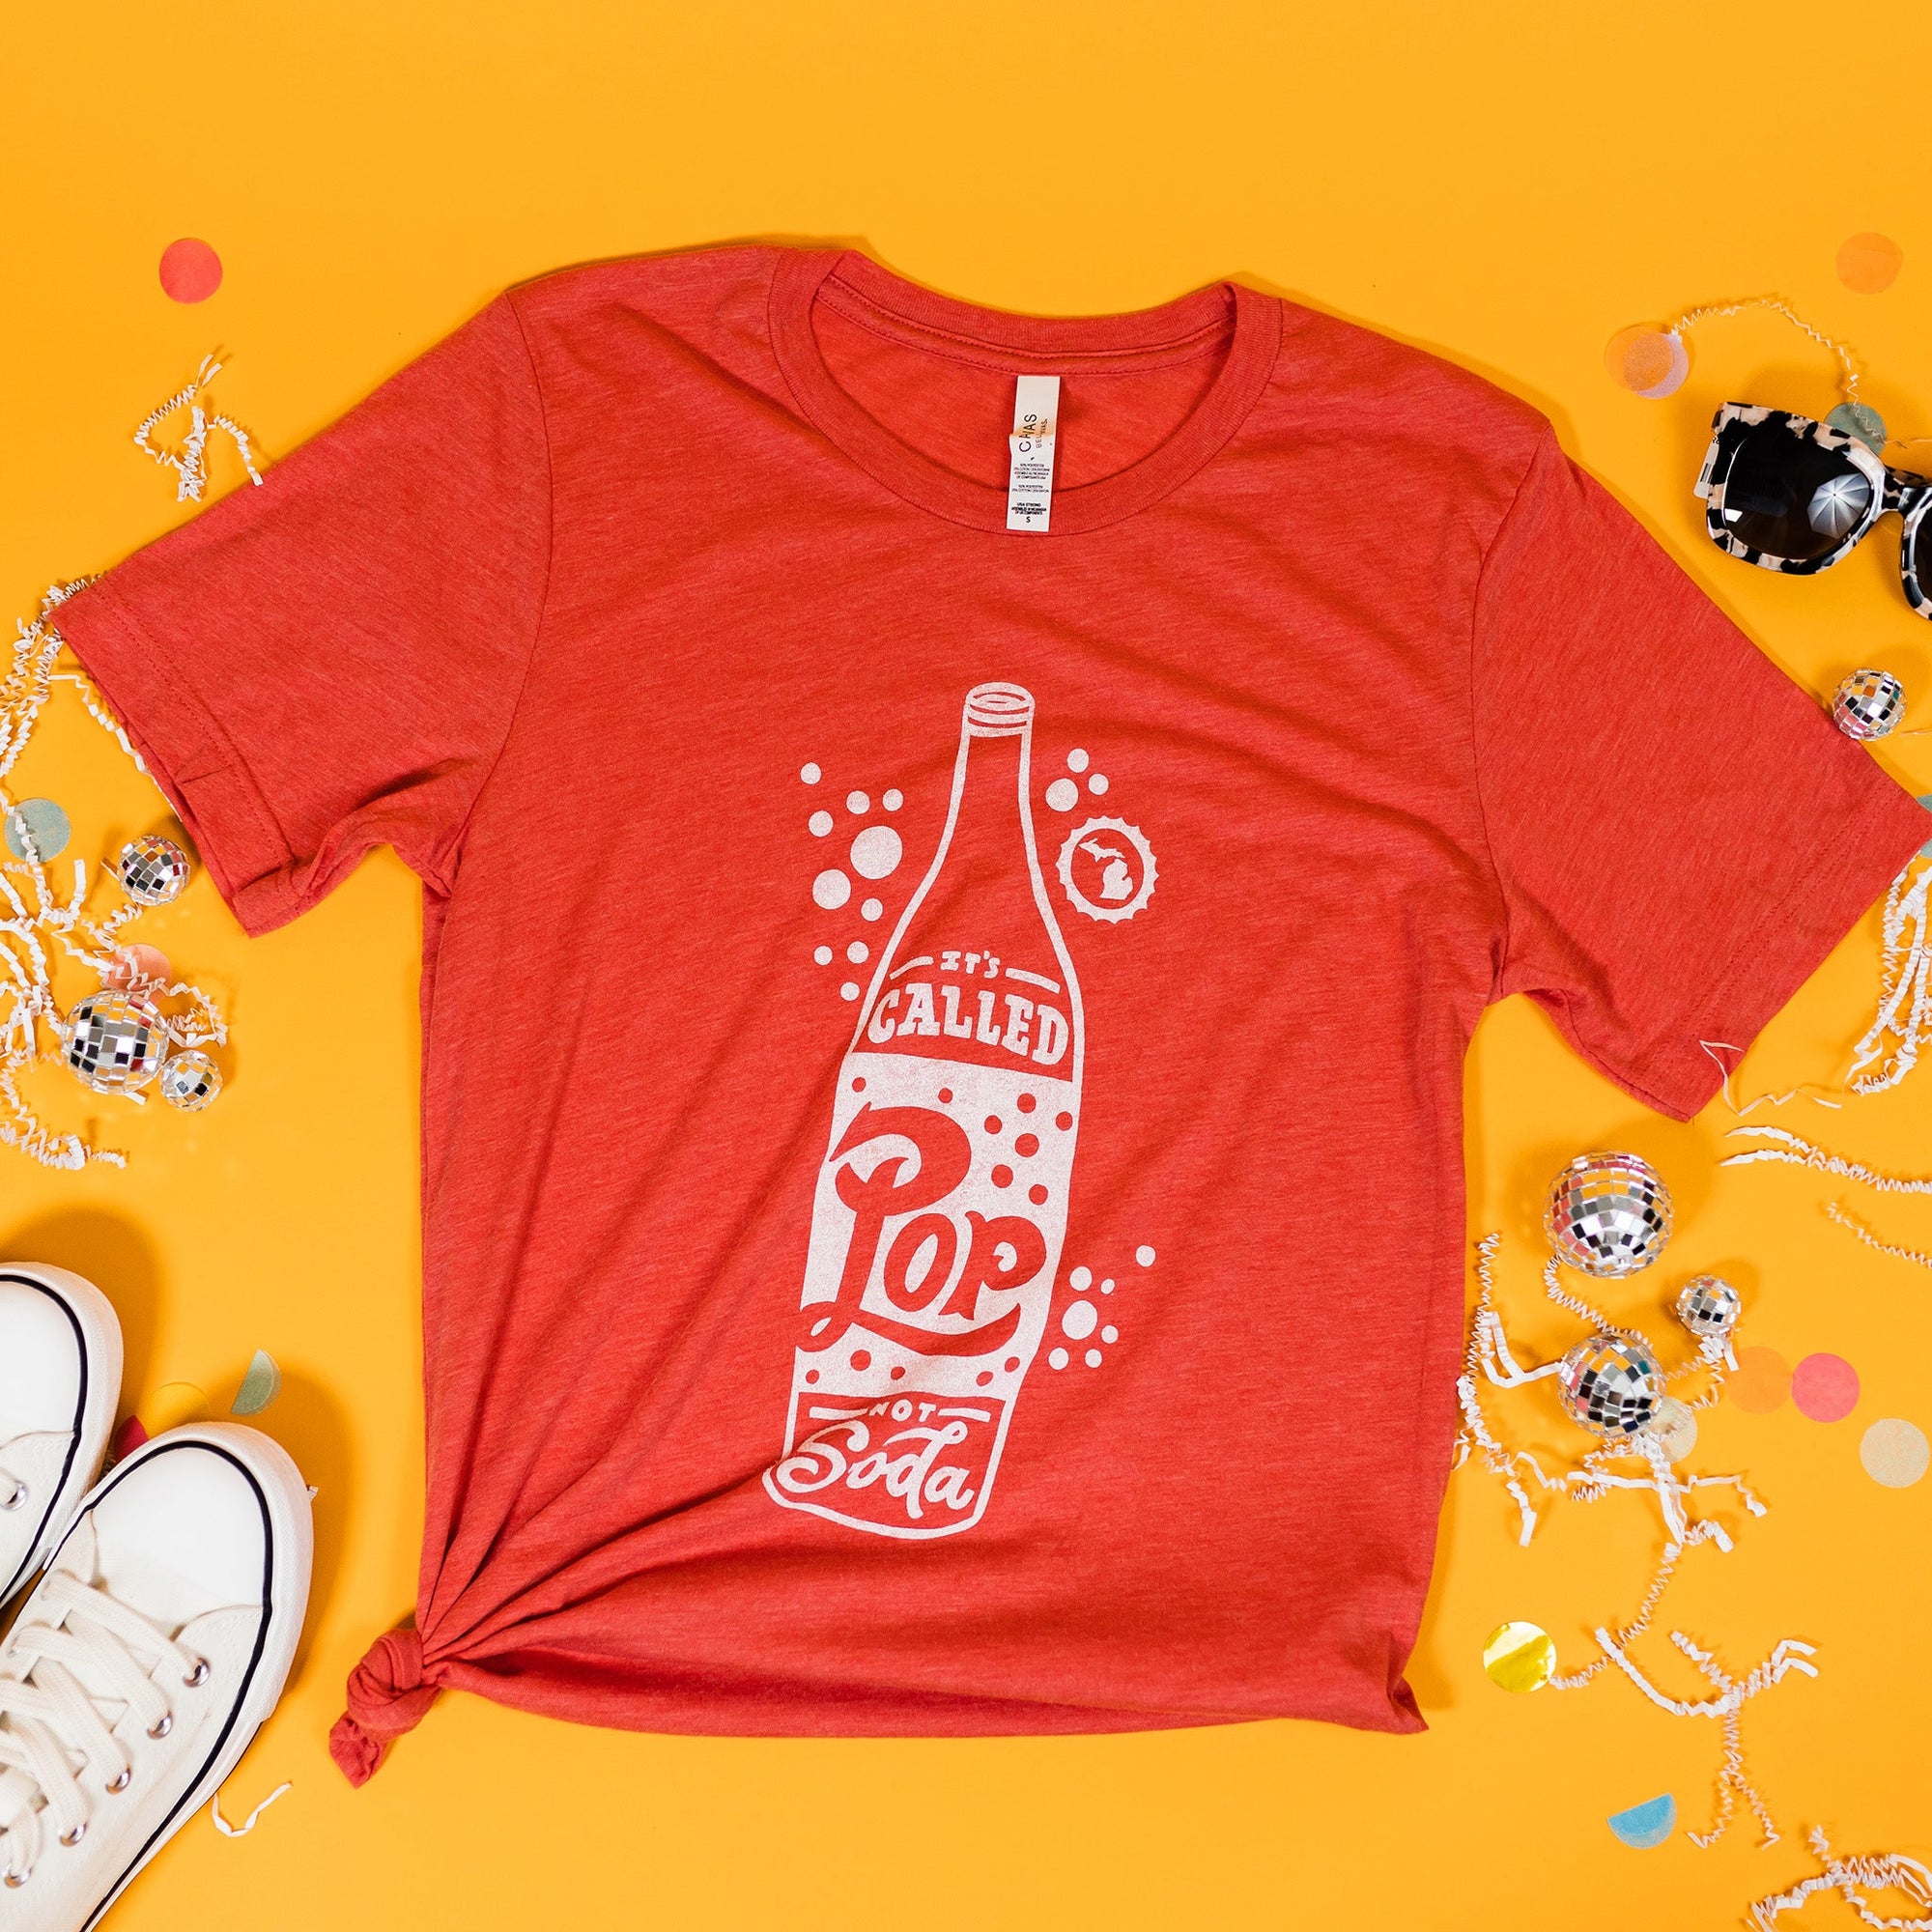 On a sunny mustard background sits a t-shirt with white crinkle and big, colorful confetti scattered around. There are mini disco balls, sunglasses, and a pair of white sneakers. This heather red tee features a custom illustration of a bottle of pop with bubbles and in white hand-lettering, it says "IT'S CALLED Pop NOT Soda."